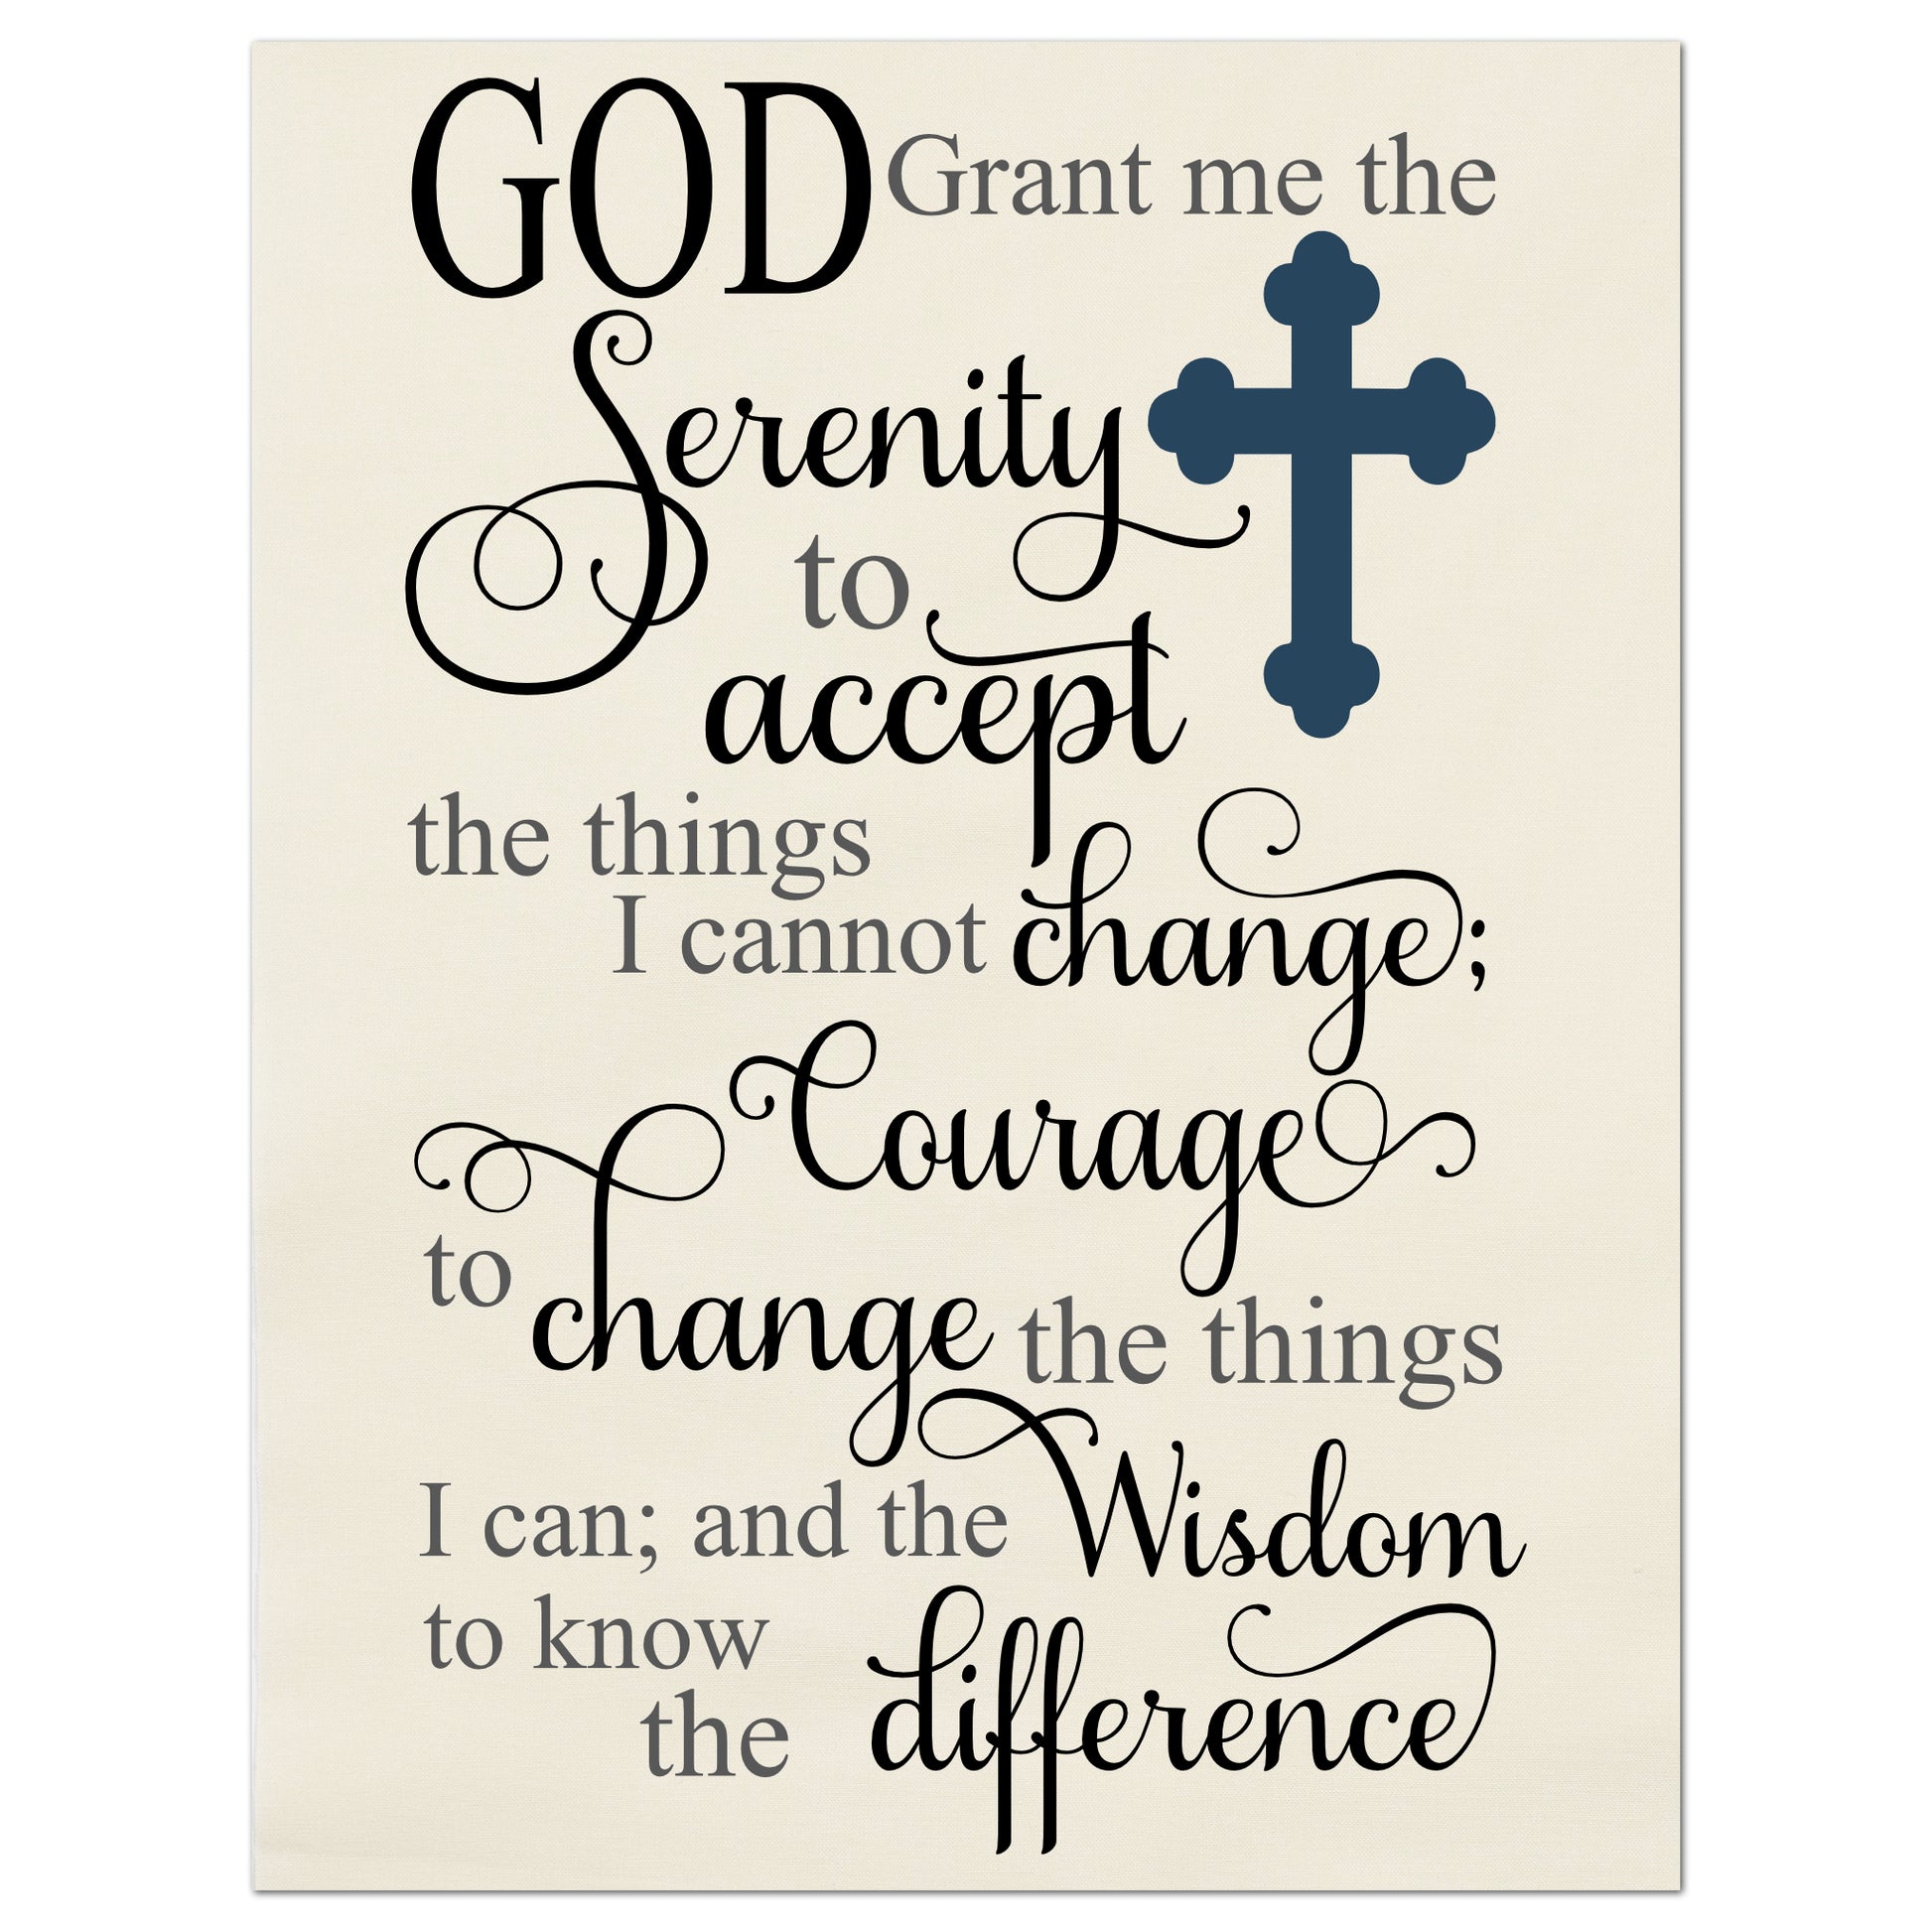 God grant me the serenity to accept the things I cannot change; courage to change the things I can; and the wisdom to know the difference - Serenity Prayer, Fabric Panel Print